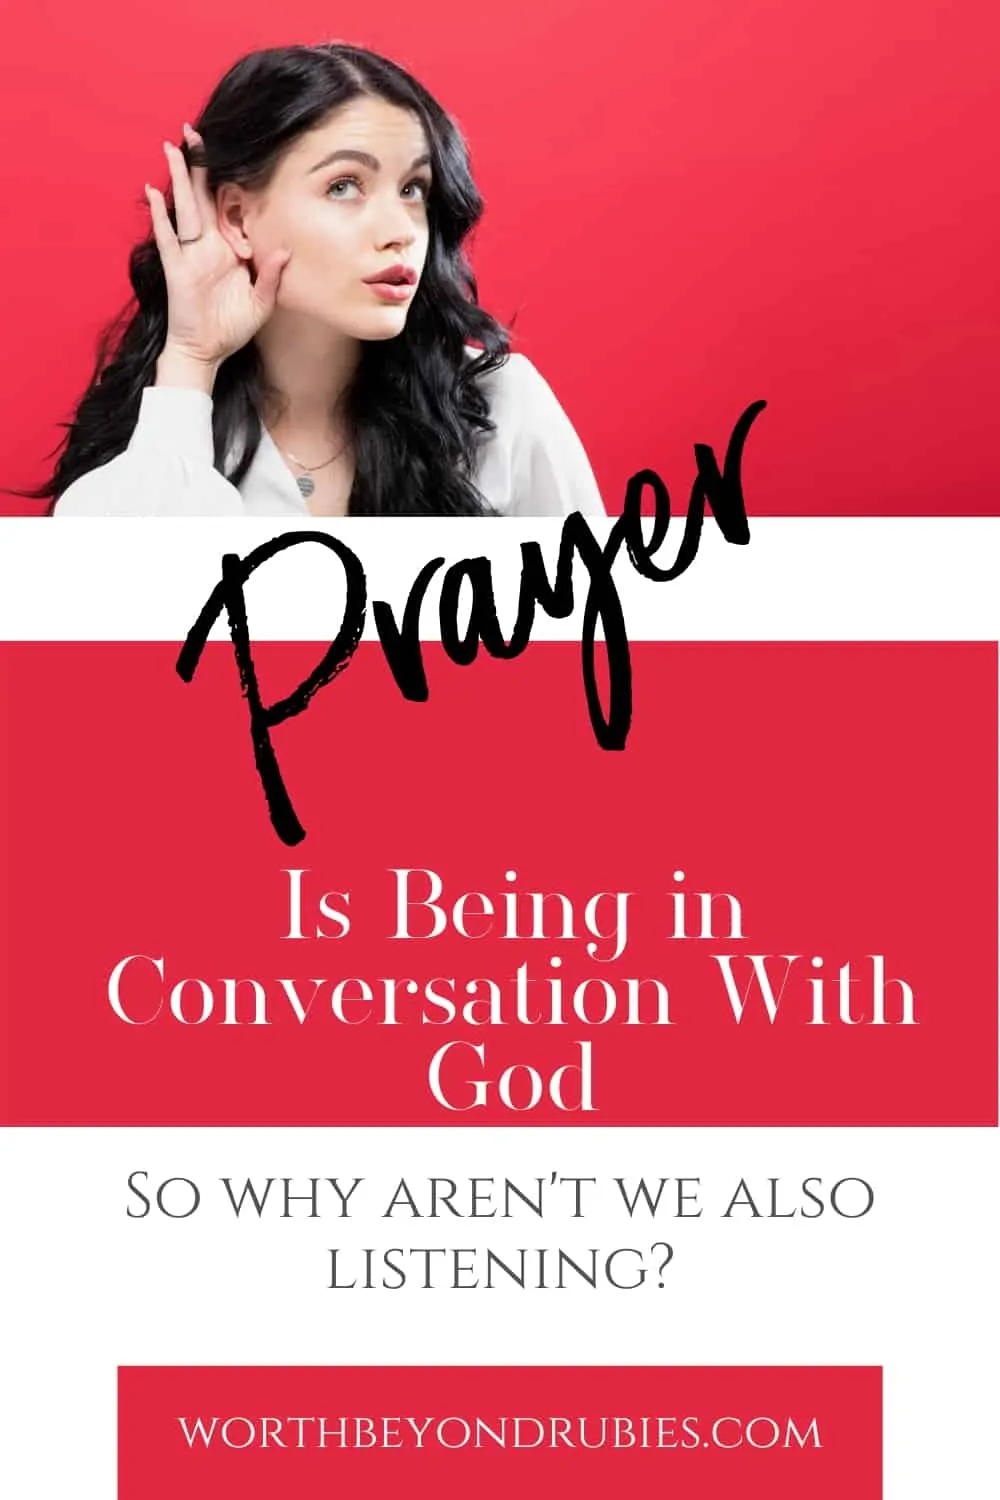 An image of a woman with long dark hair against a red background, holding her hand up to her ear like she is trying to hear something - a text overlay that says Prayer is Being in Conversation With God - So Why Aren't We Listening?